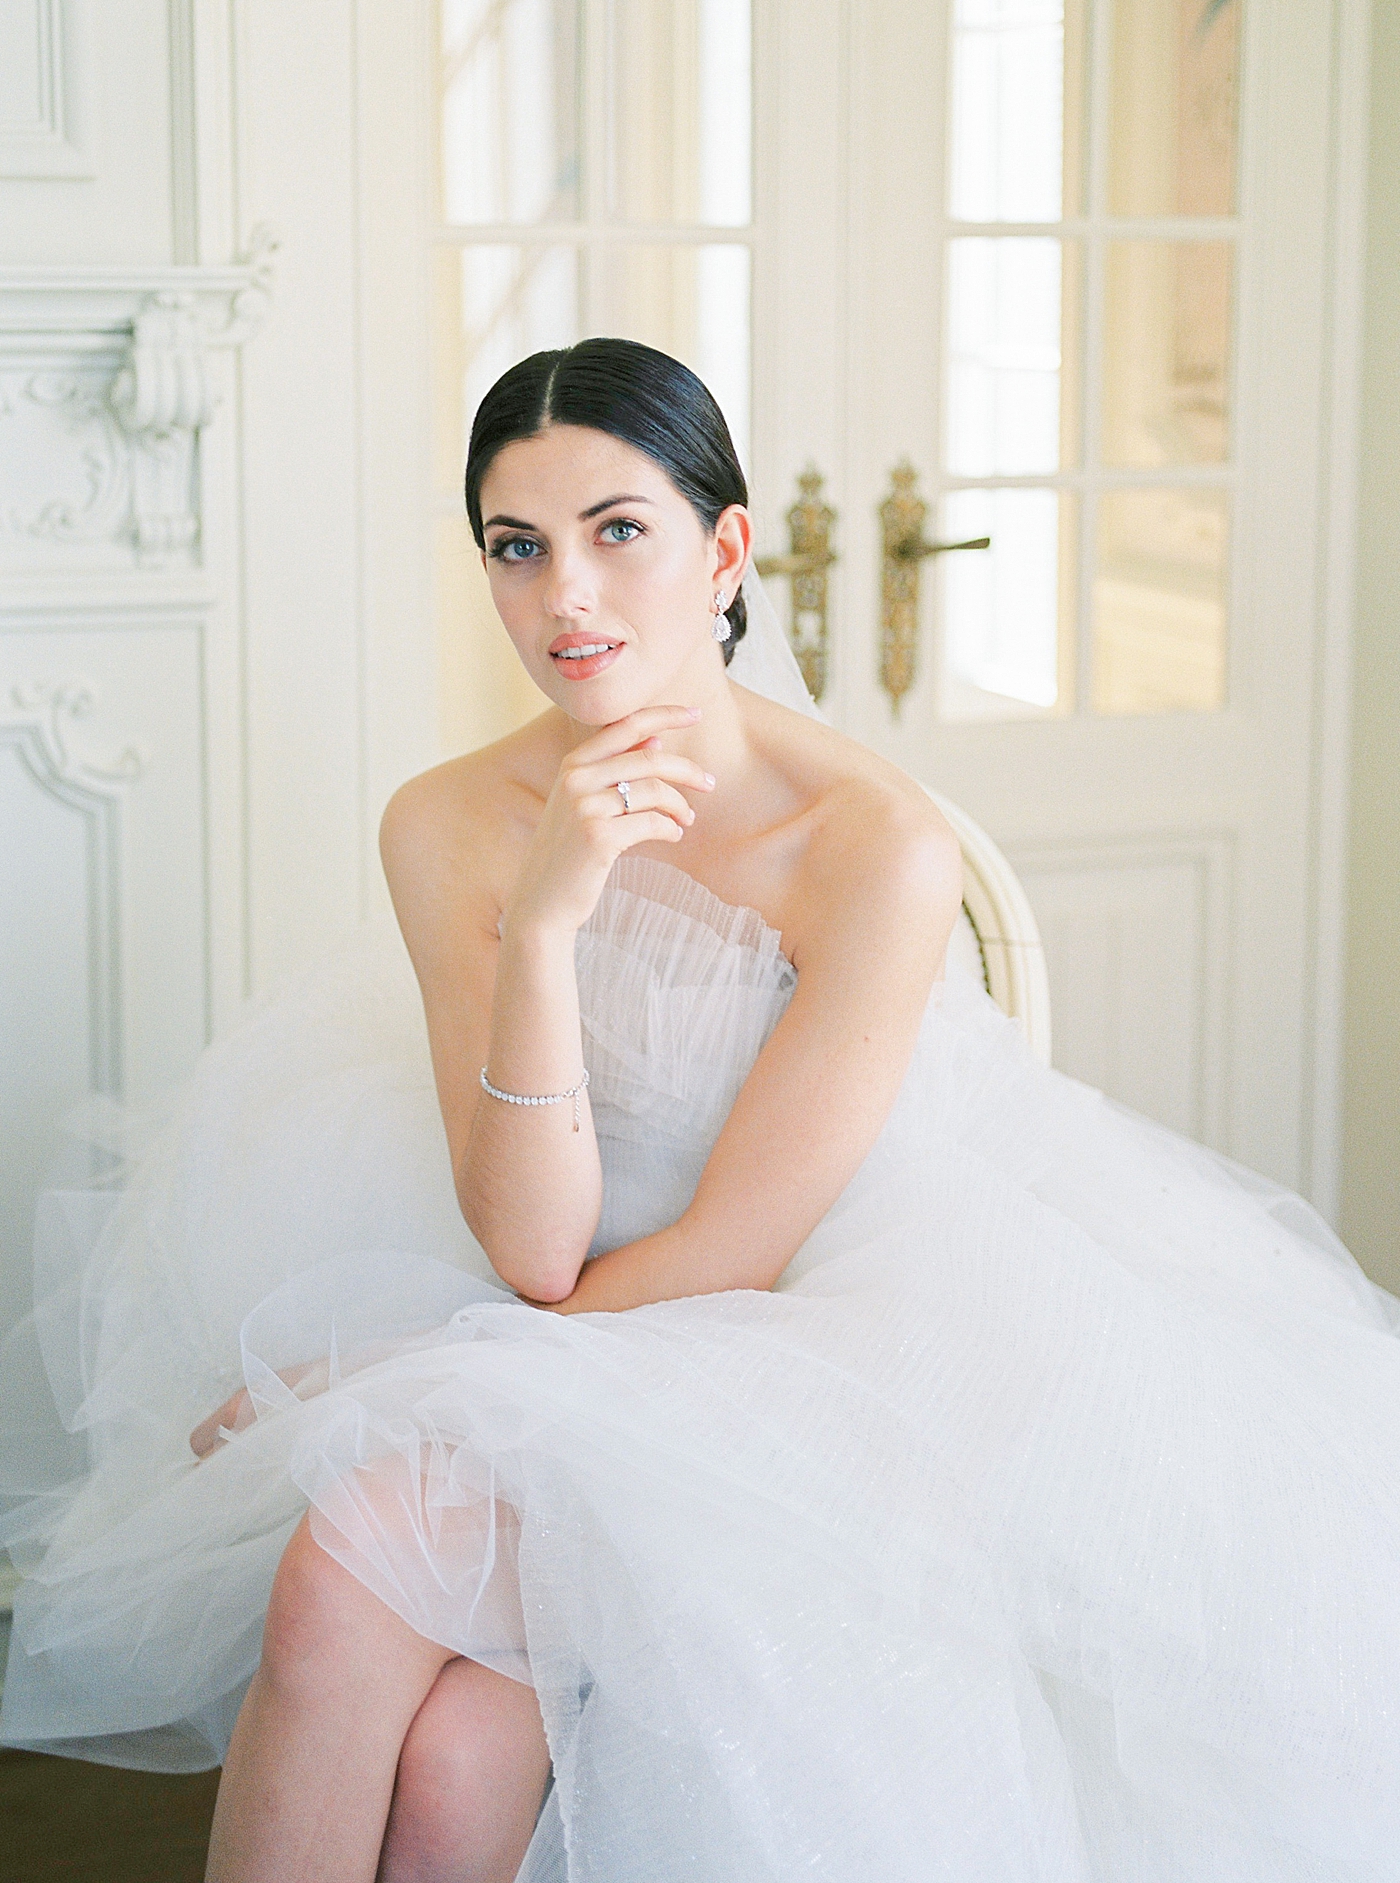 Bridal portraits of bride in couture gown in her getting ready room | Image by Diane Sotero 